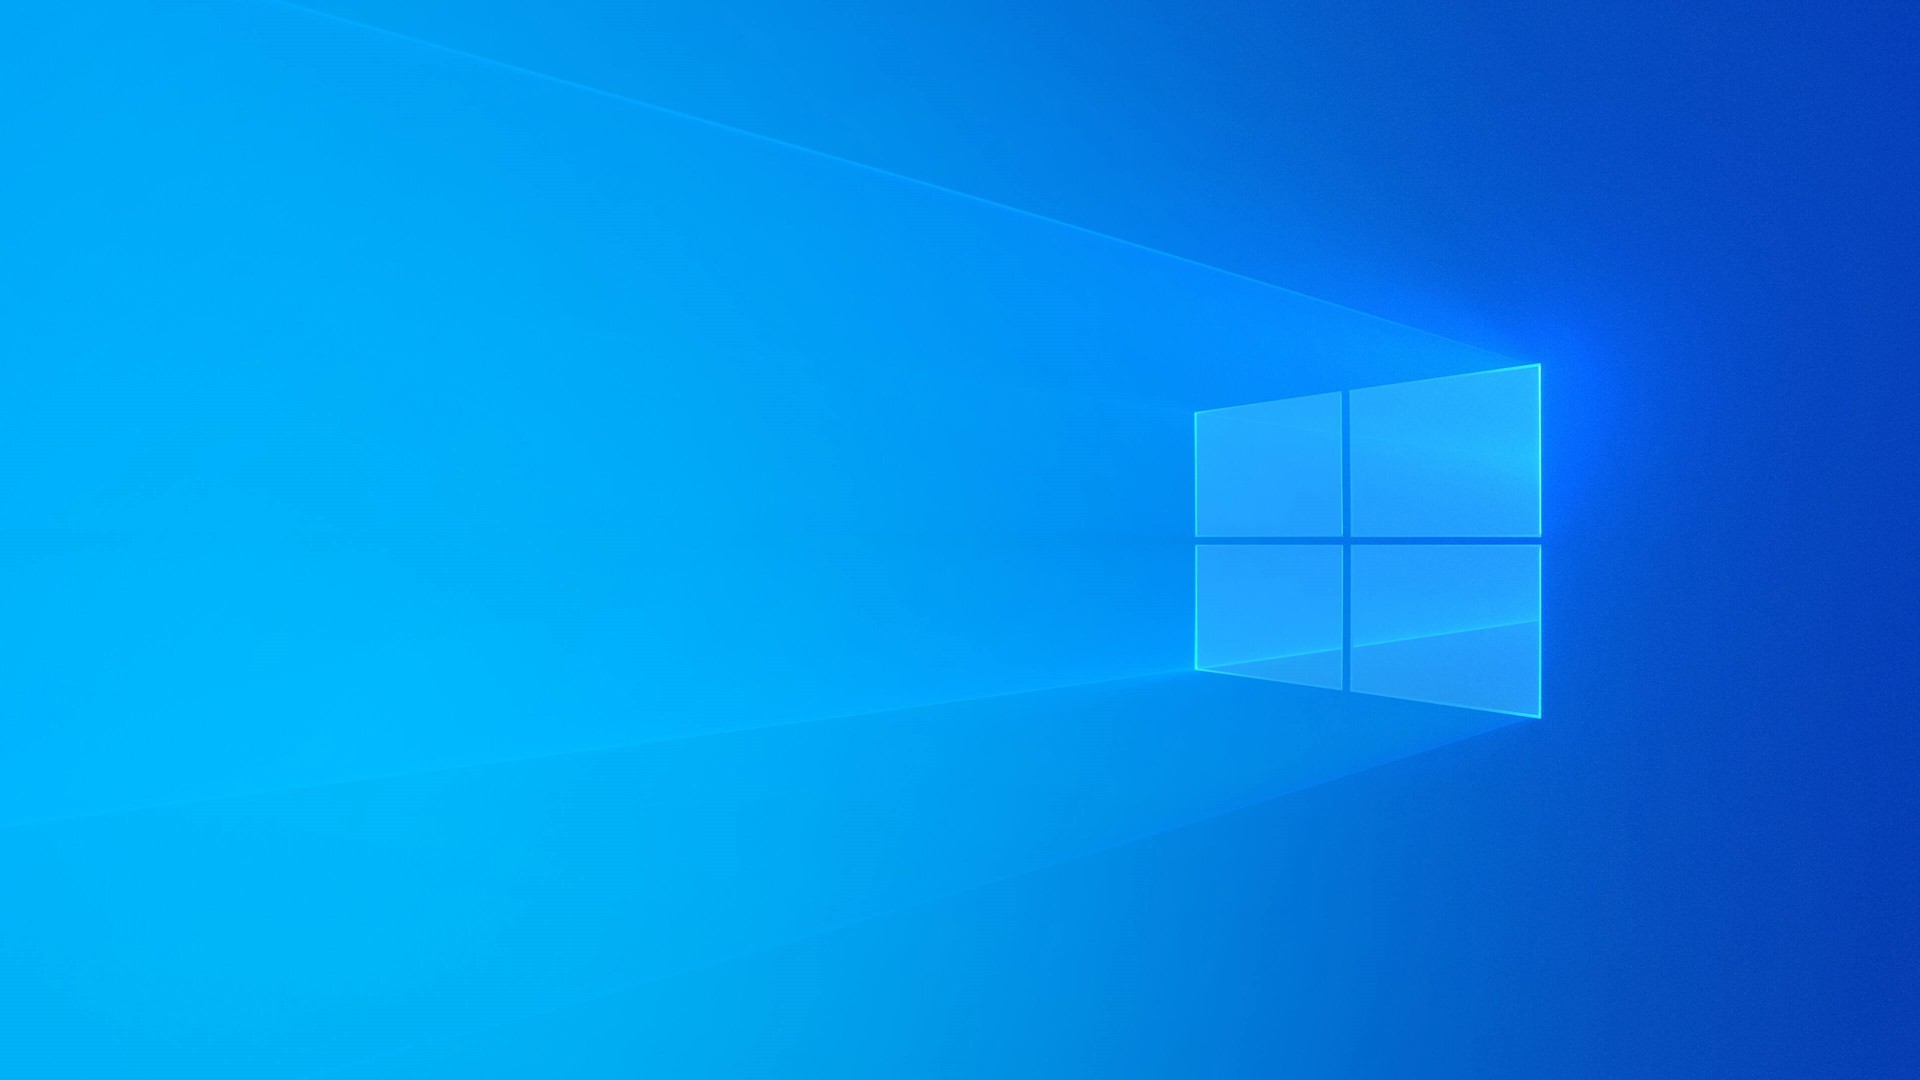 1920x1080 New Default Windows 10 Light Theme wallpaper now available at WallpaperHub  at 4K resolution